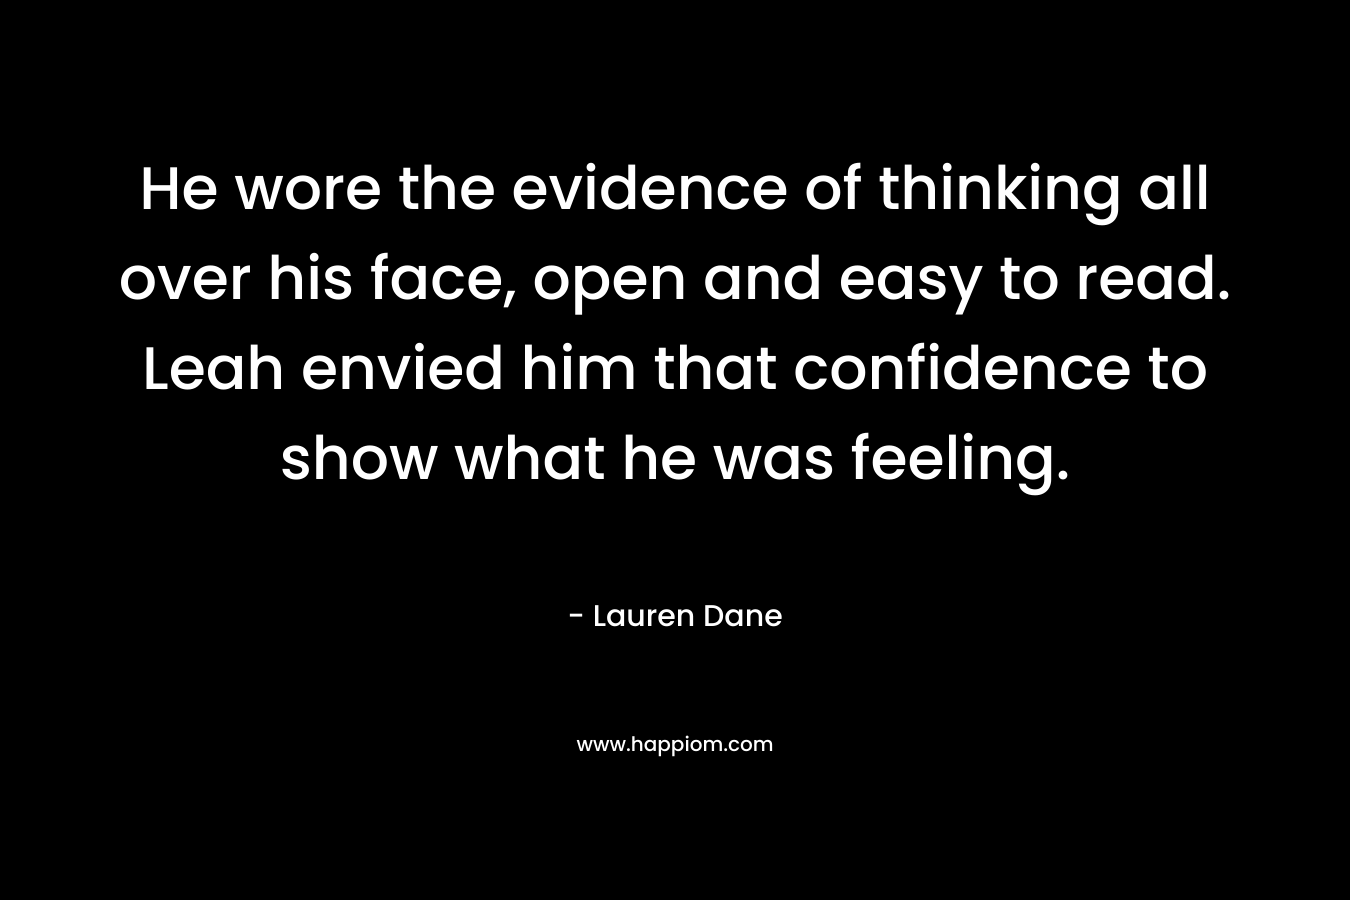 He wore the evidence of thinking all over his face, open and easy to read. Leah envied him that confidence to show what he was feeling. – Lauren Dane